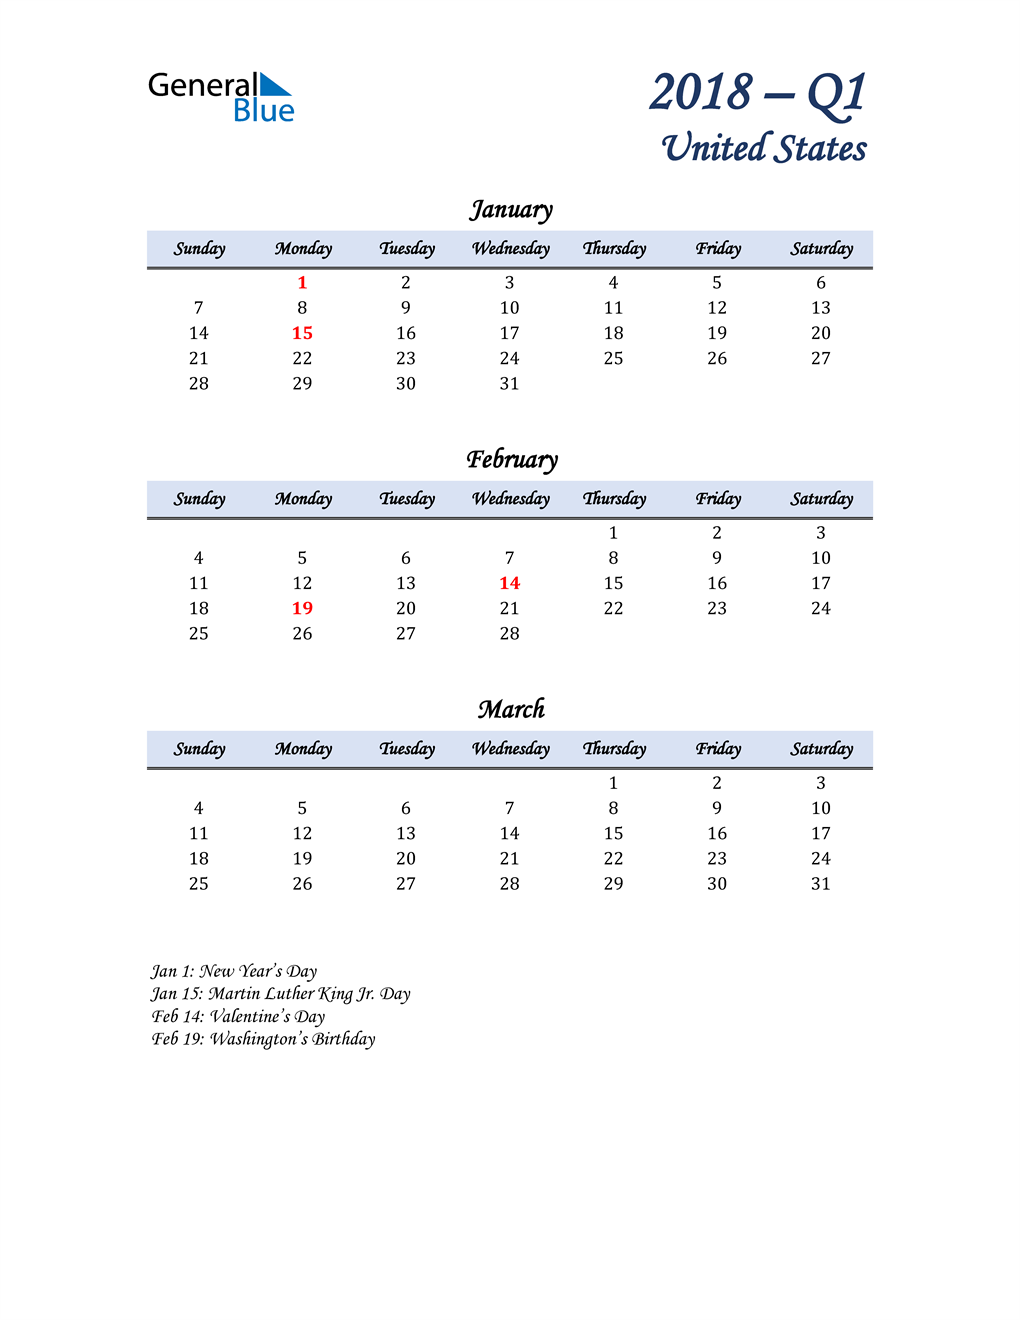  January, February, and March Calendar for United States